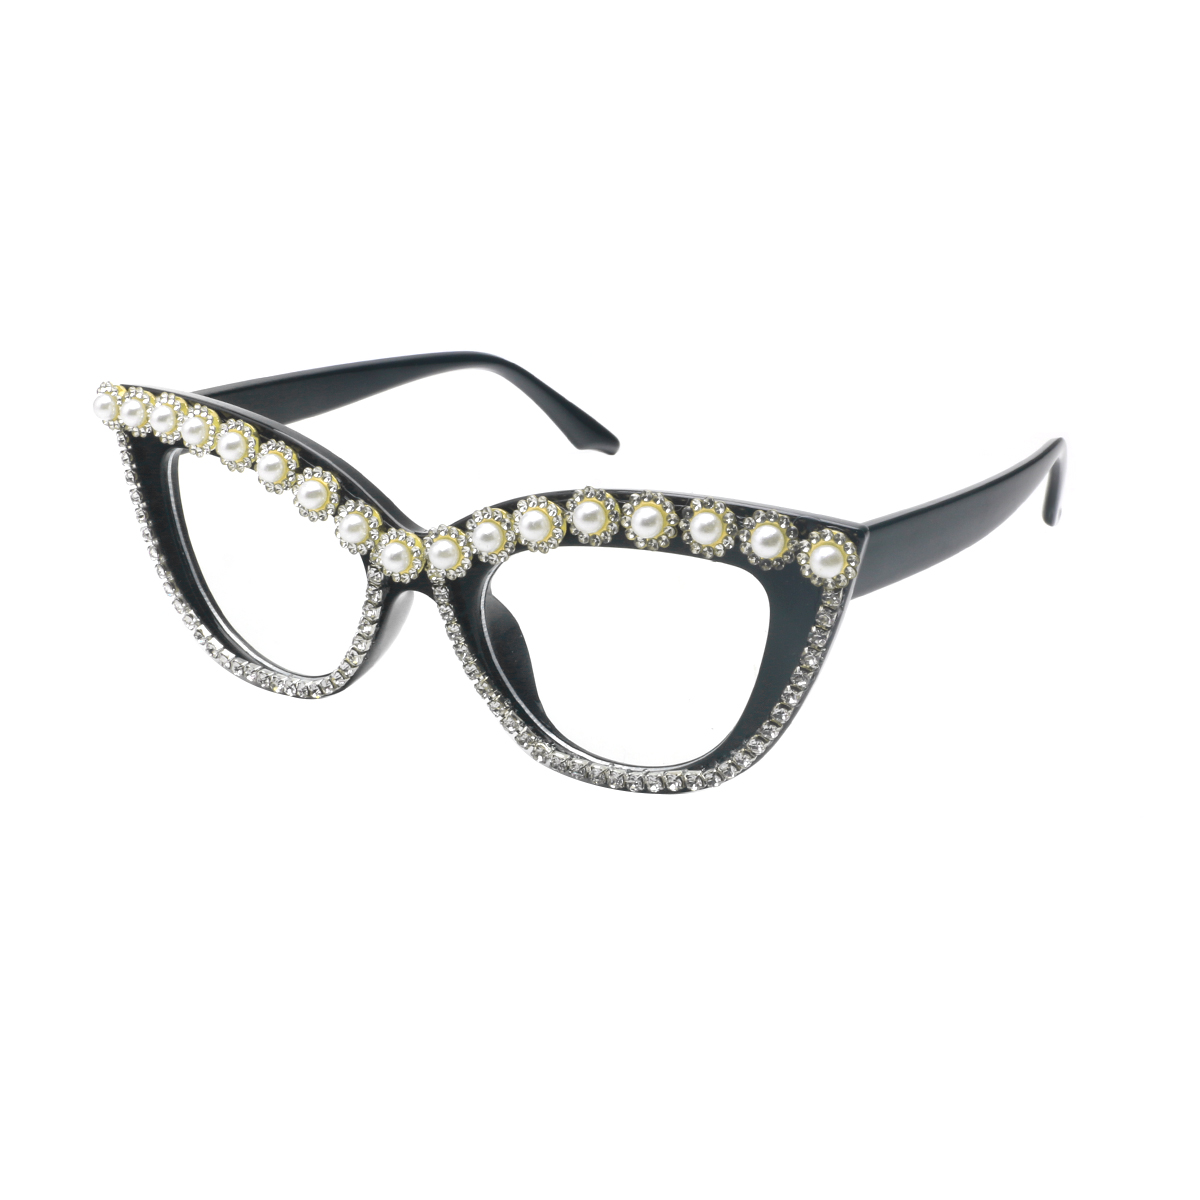 Sicas - Cat-eye Gold-Silver Reading Glasses for Women